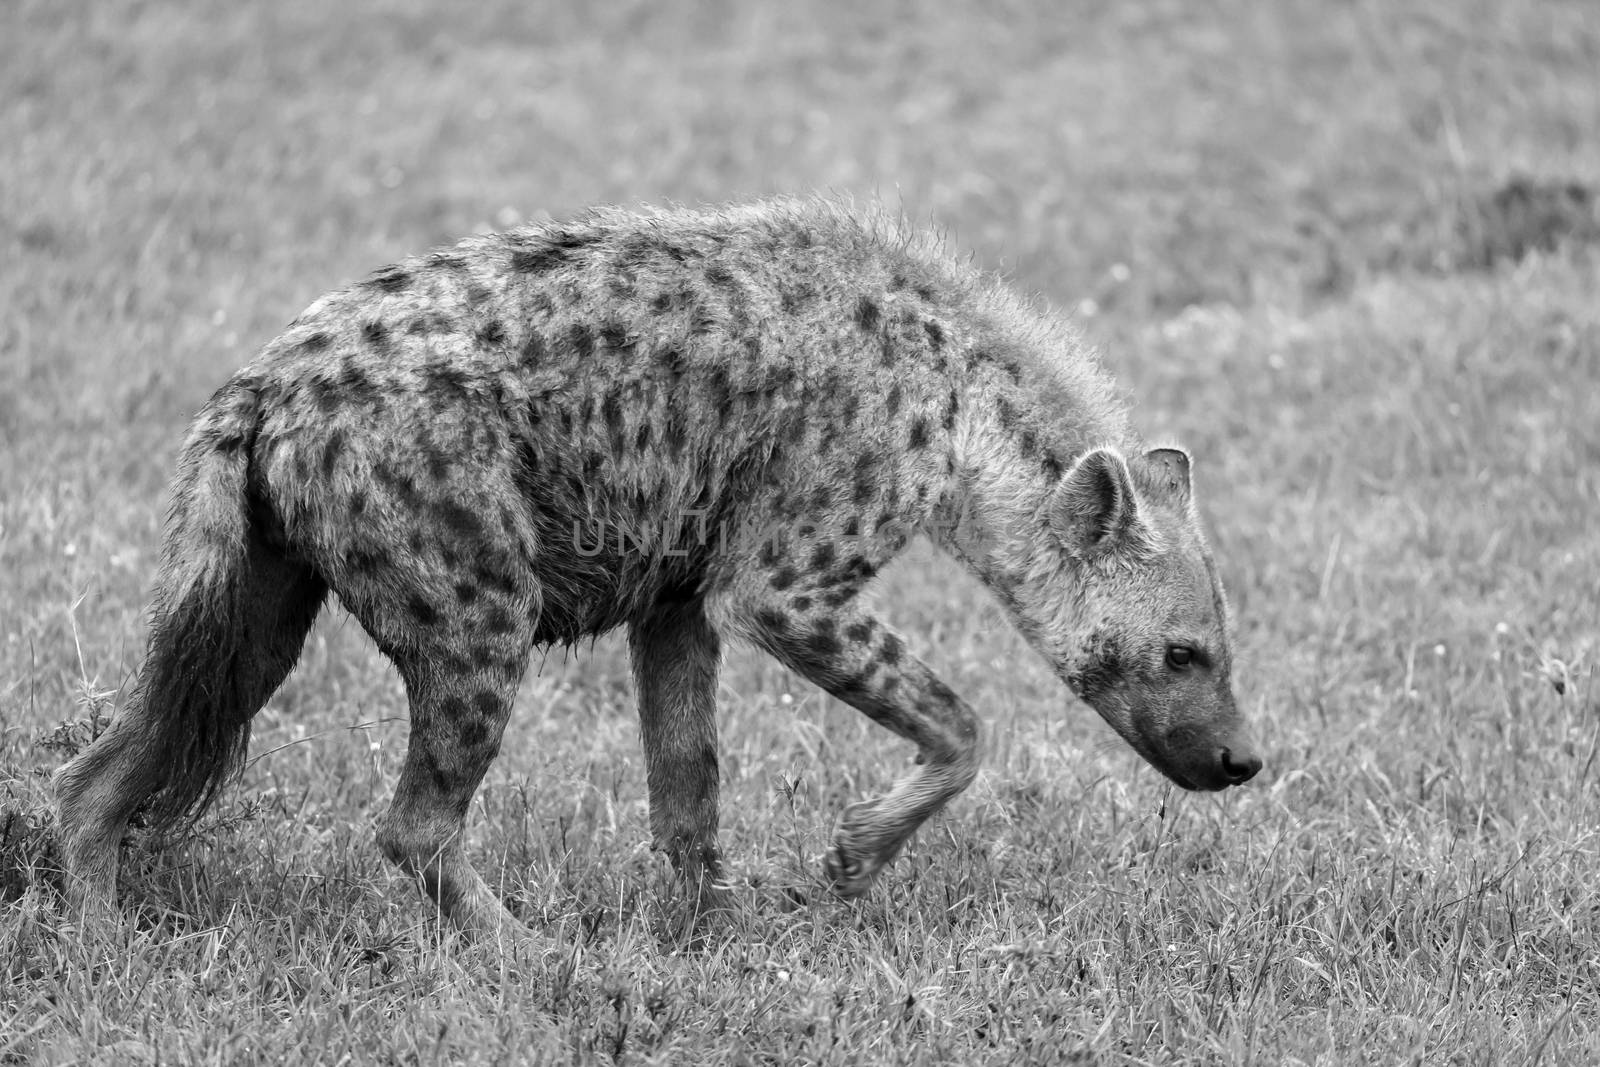 A hyena walks in the savanna in search of food by 25ehaag6